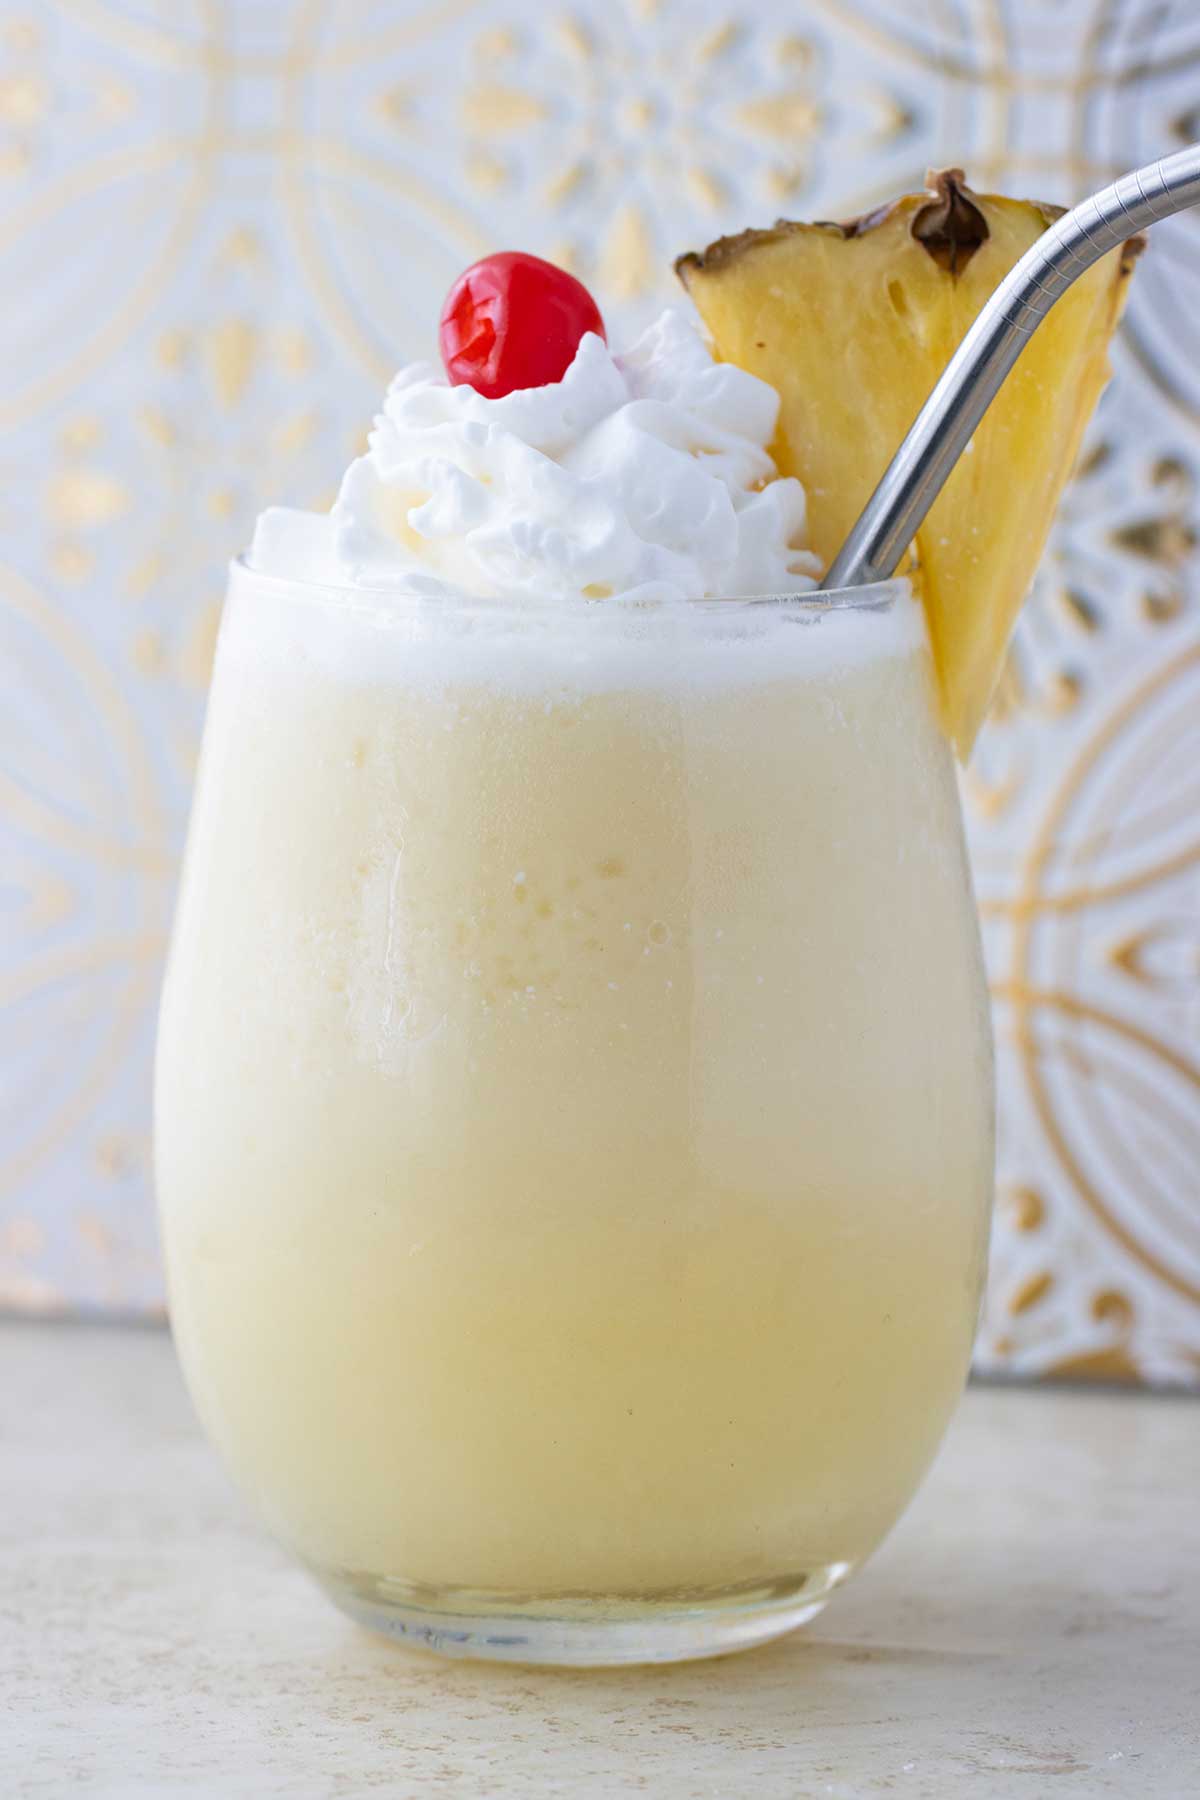 a close up image of a glass cup with pina colada topped with whipped cream, a cherry and a slice of pineapple on the side.